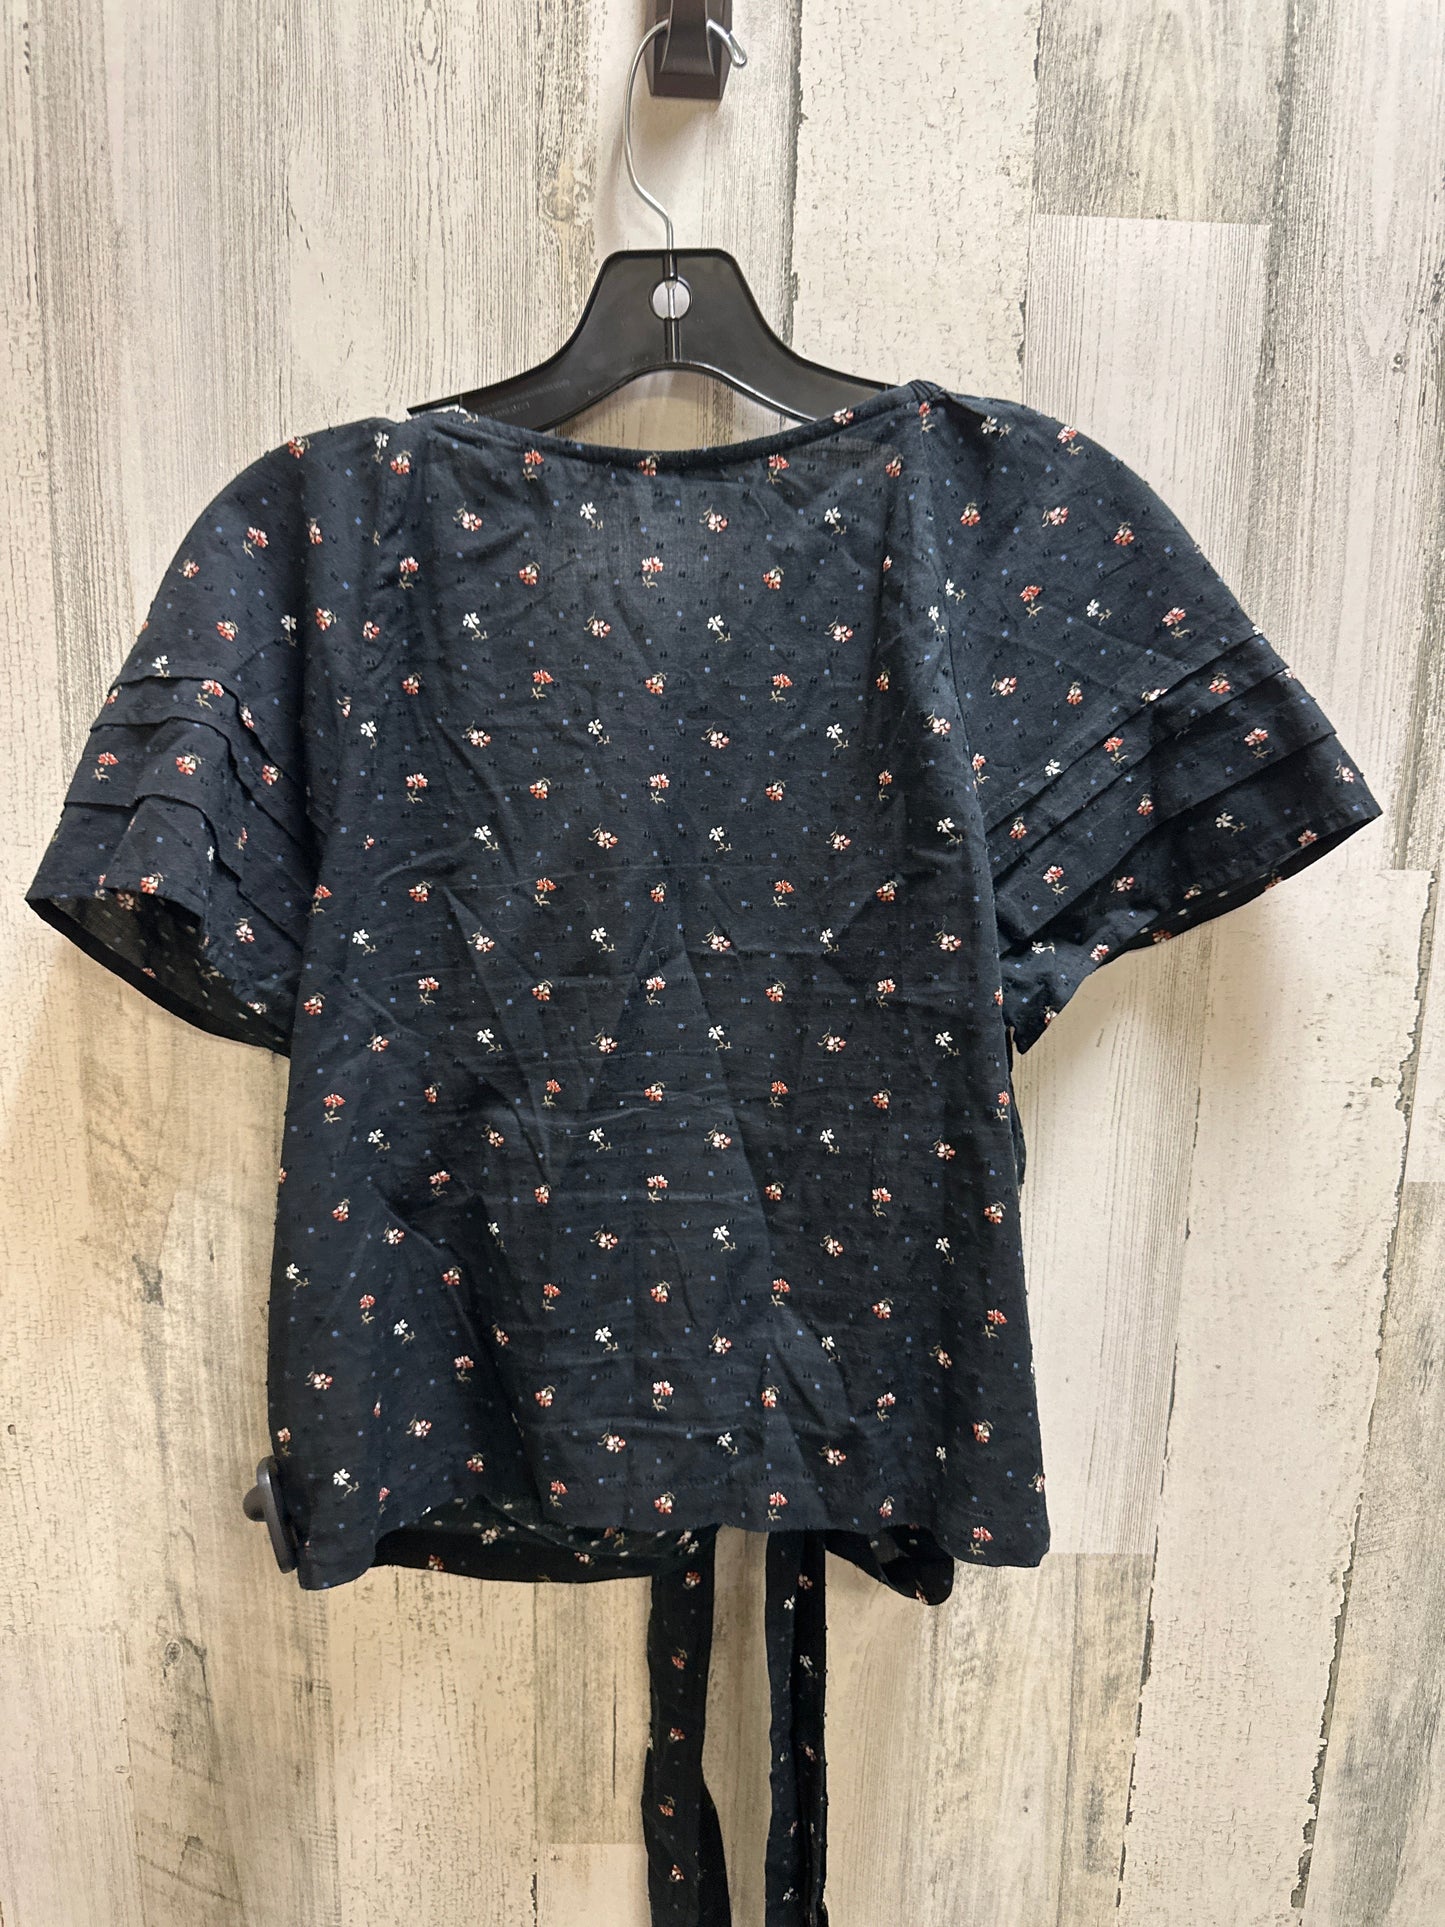 Floral Print Top Short Sleeve Madewell, Size S